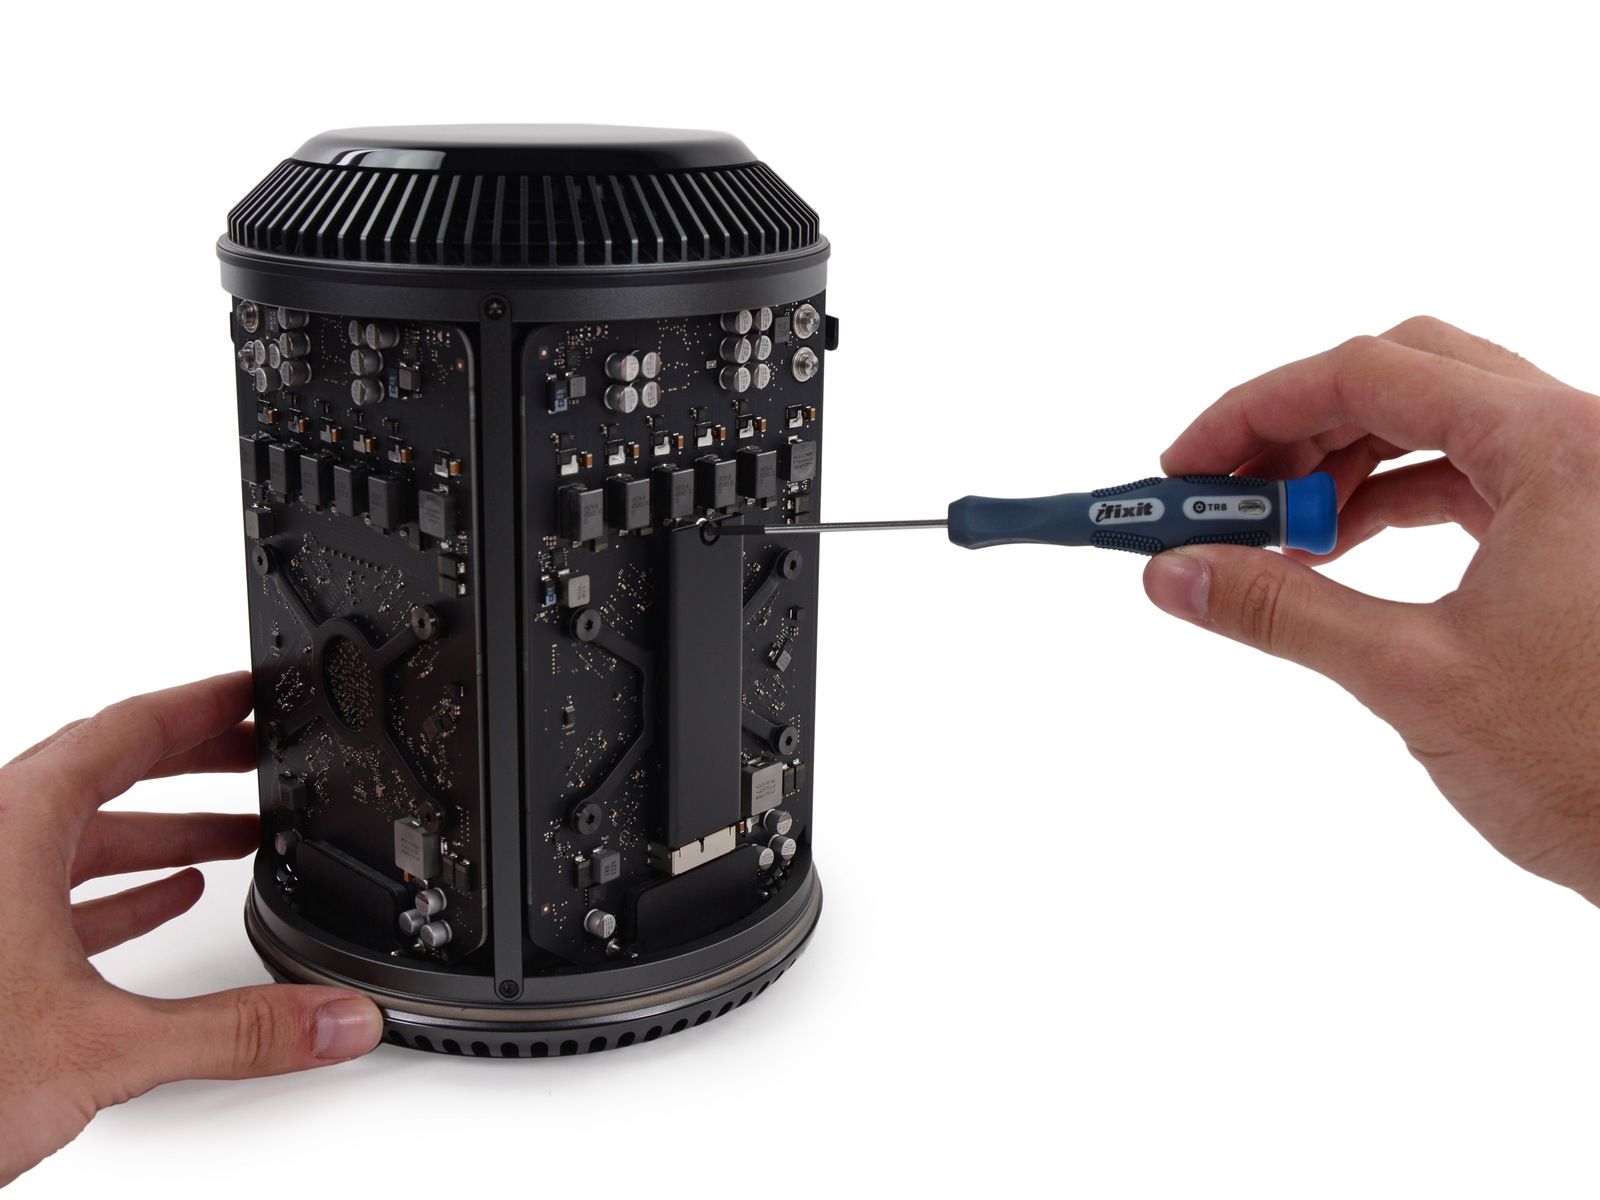 apple s new mac pro is easy to take apart and fix says ifixit image 1